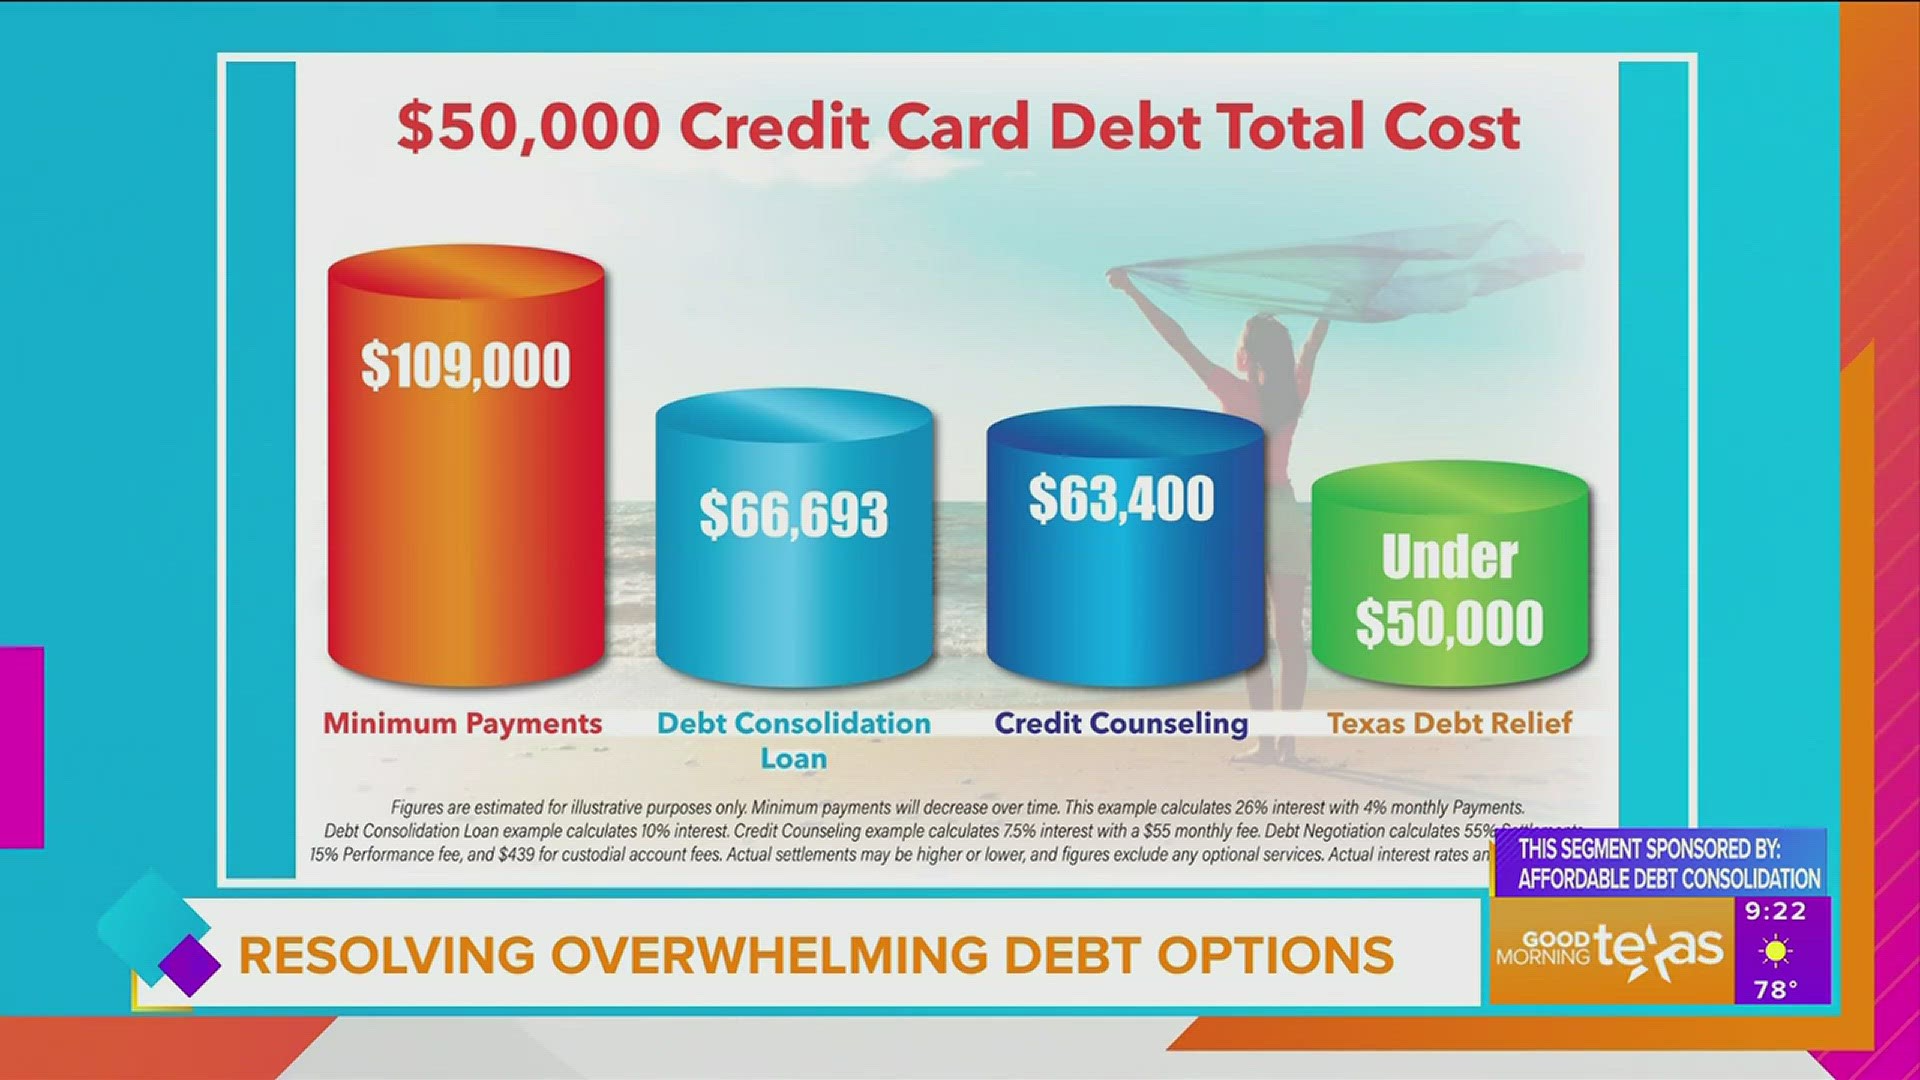 This segment is sponsored by: Affordable Debt Consolidation